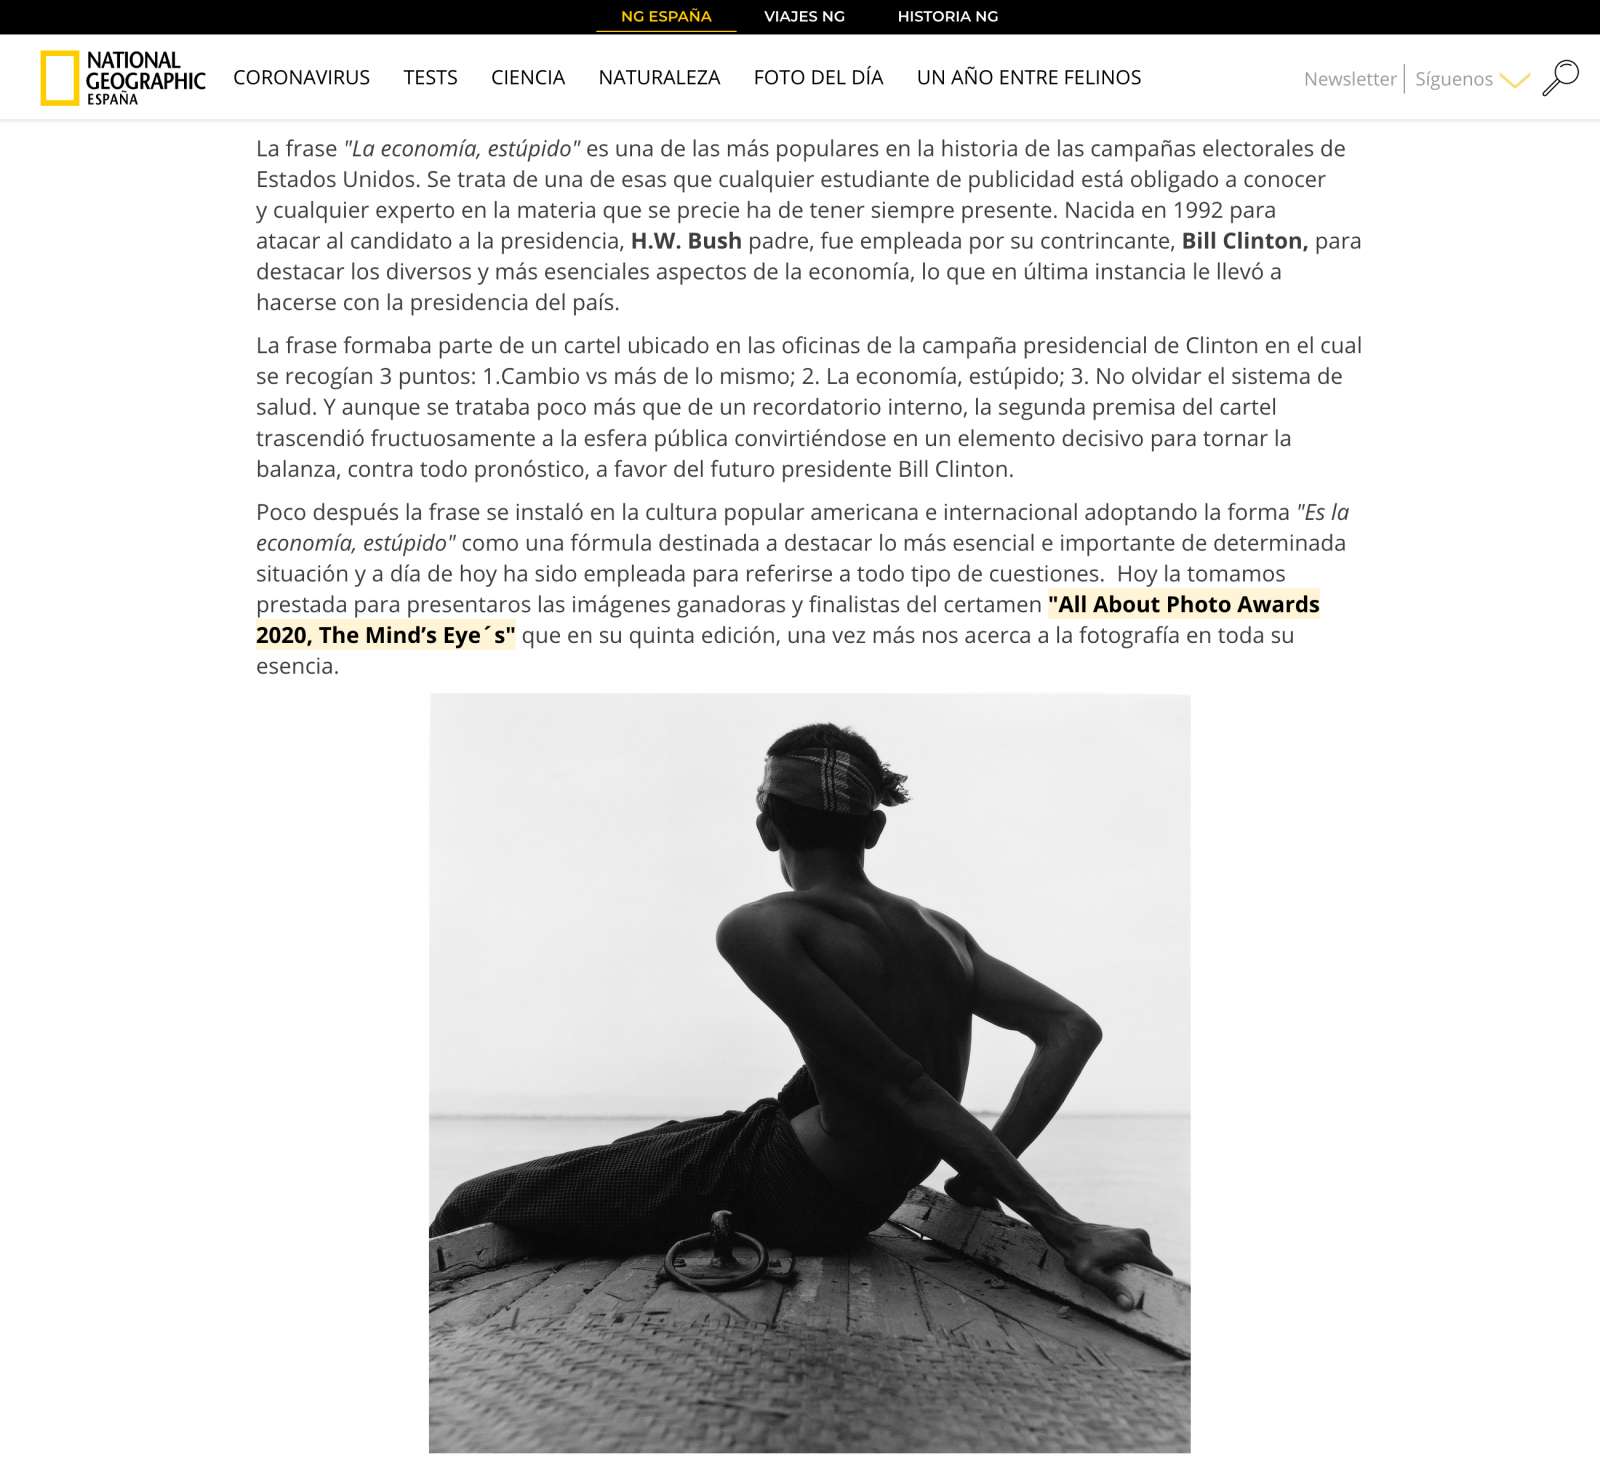 All About Photo Awards 2020 in The National Geographic Espana